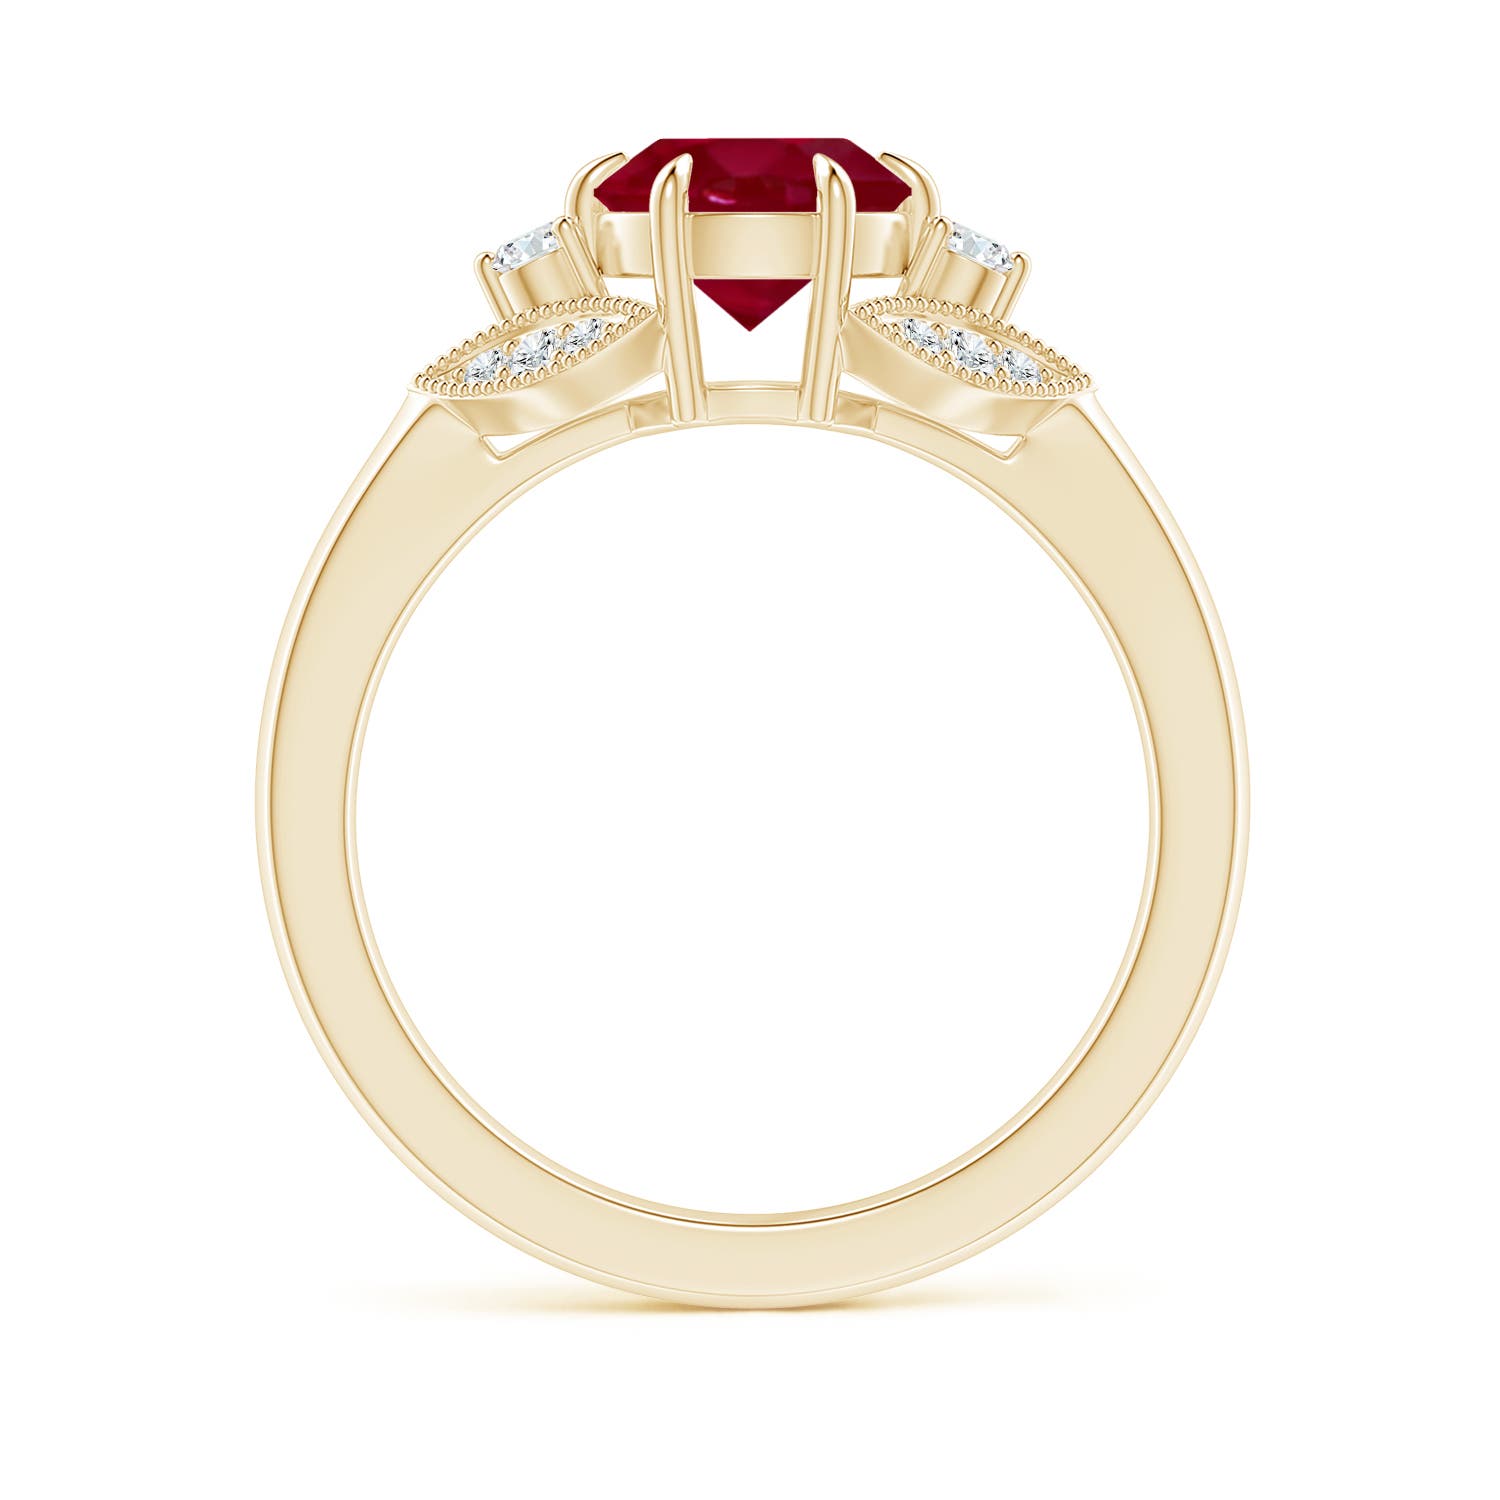 AA - Ruby / 1.64 CT / 14 KT Yellow Gold